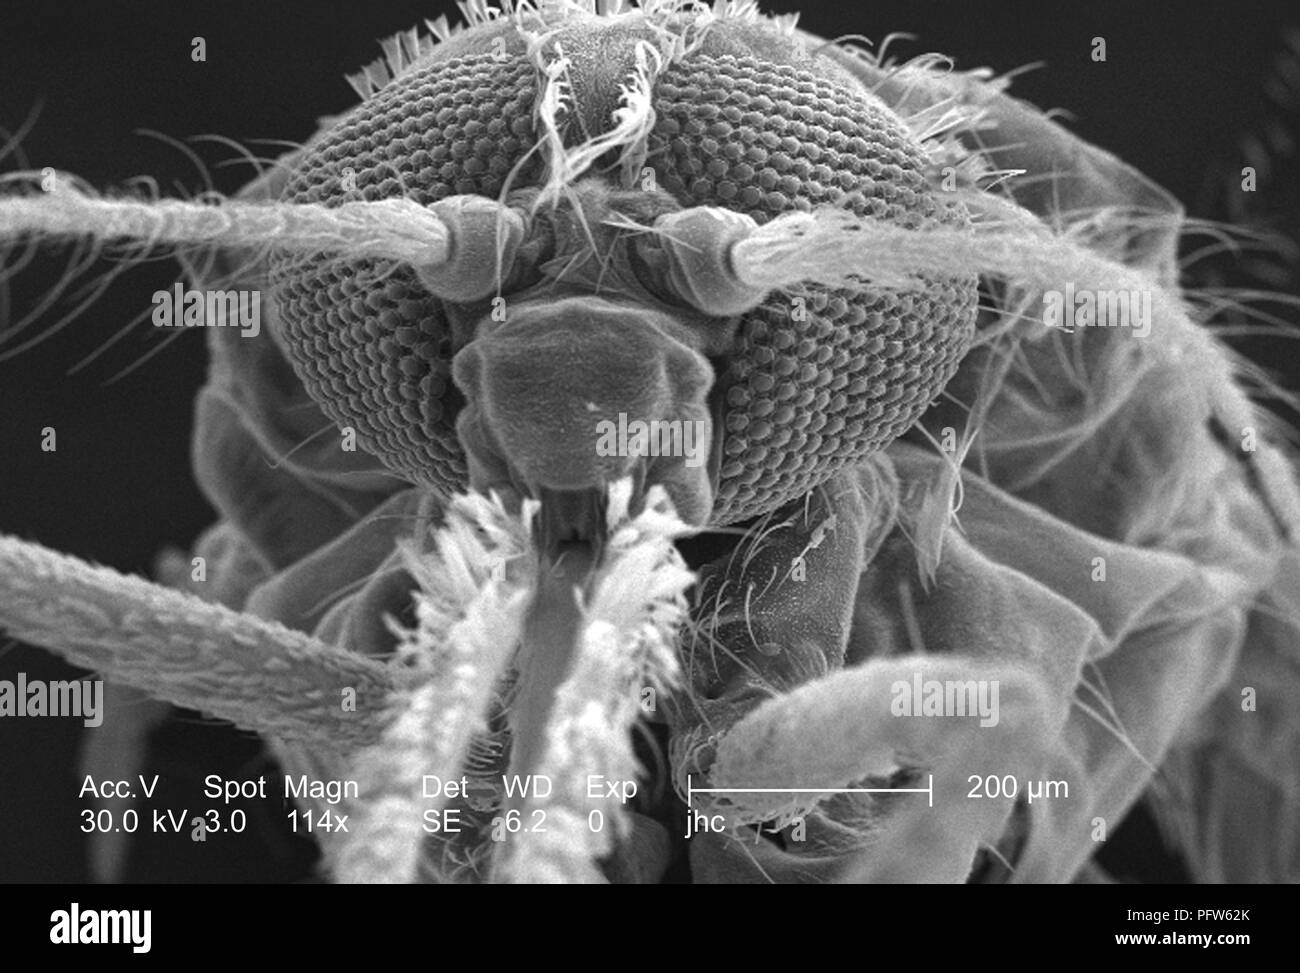 Morphologic features on the exoskeletal surface of an Anopheles gambiae mosquito's anterior head region, revealed in the 114x magnified scanning electron microscopic (SEM) image, 2006. Image courtesy Centers for Disease Control (CDC) / Paul Howell. () Stock Photo